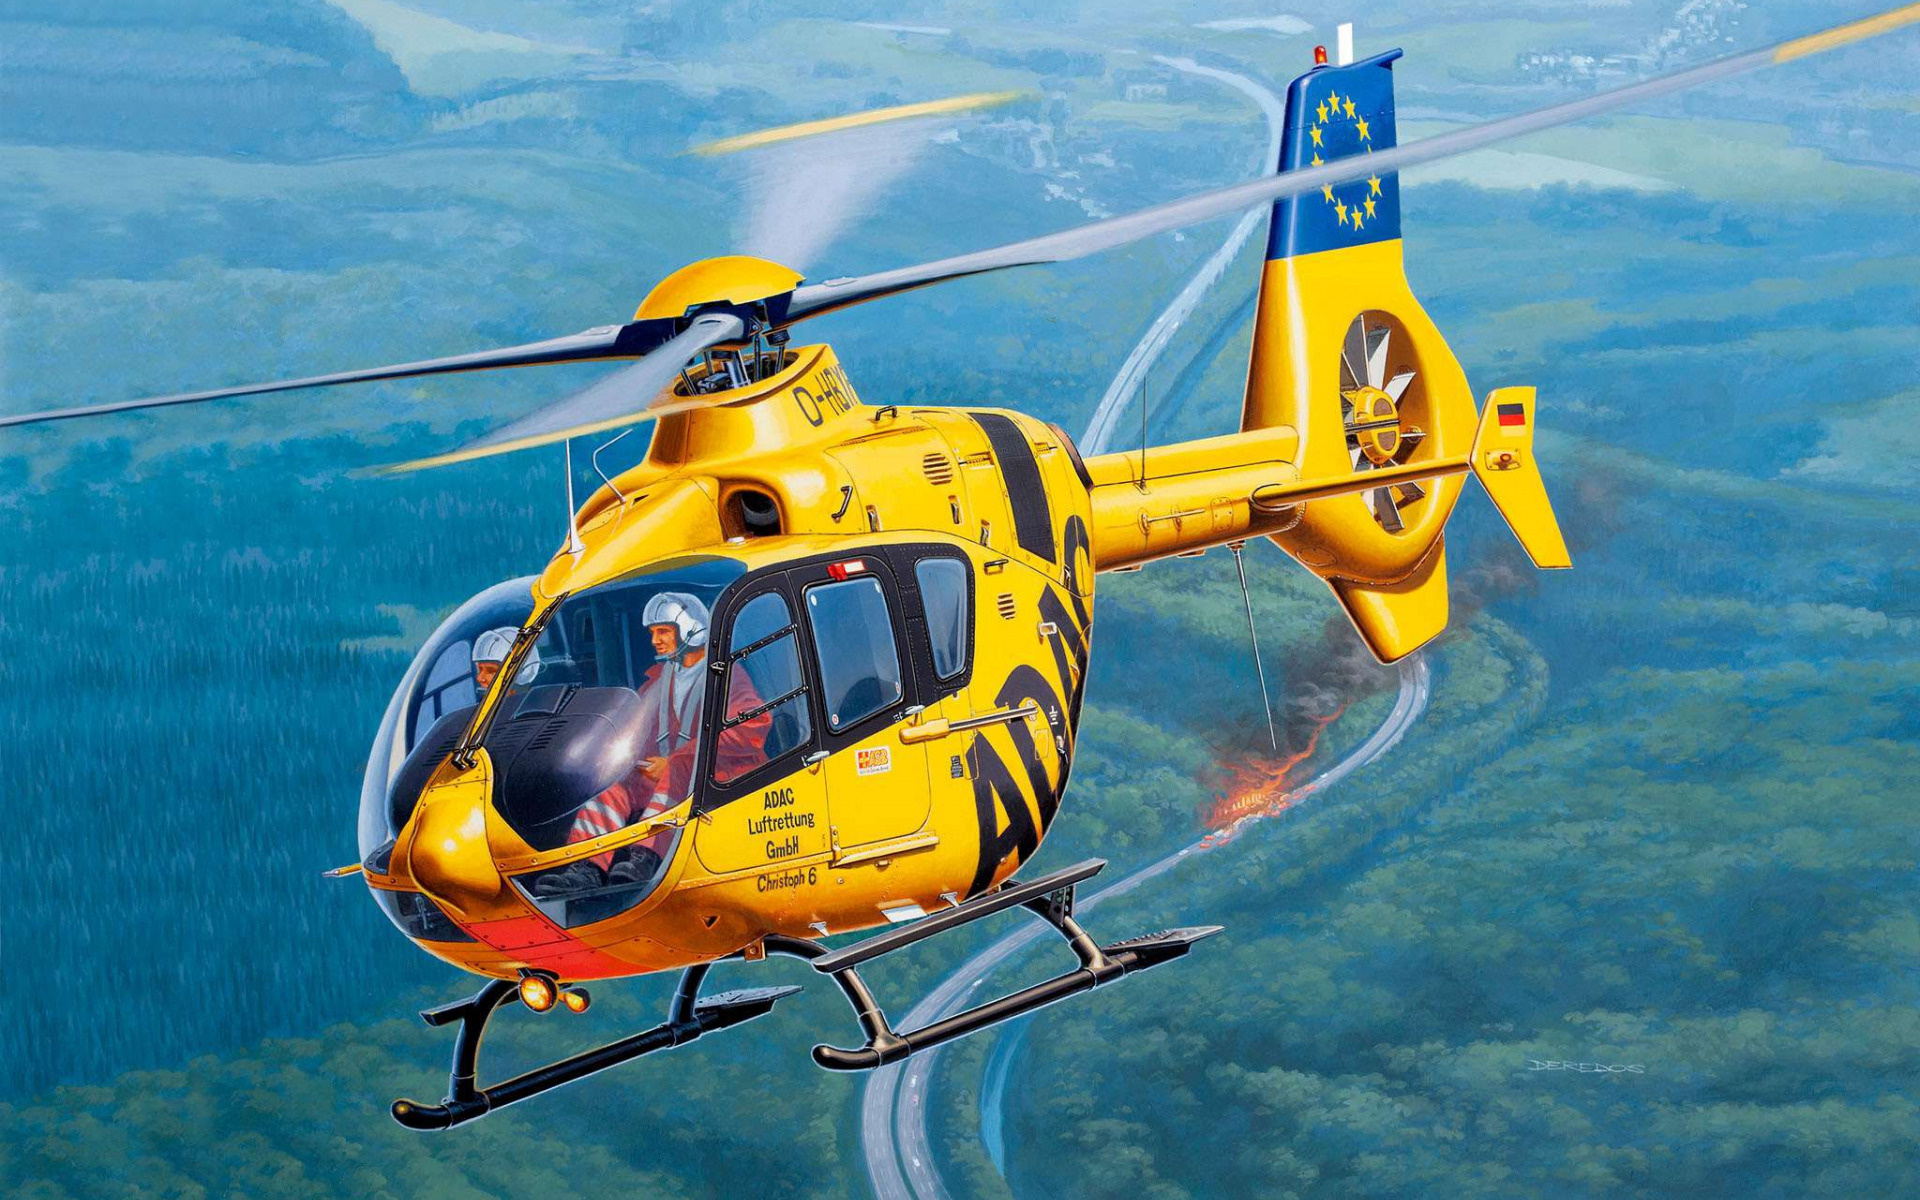 Eurocopter EC135, ADAC rescue helicopter, HD wallpapers, High-quality pictures, 1920x1200 HD Desktop